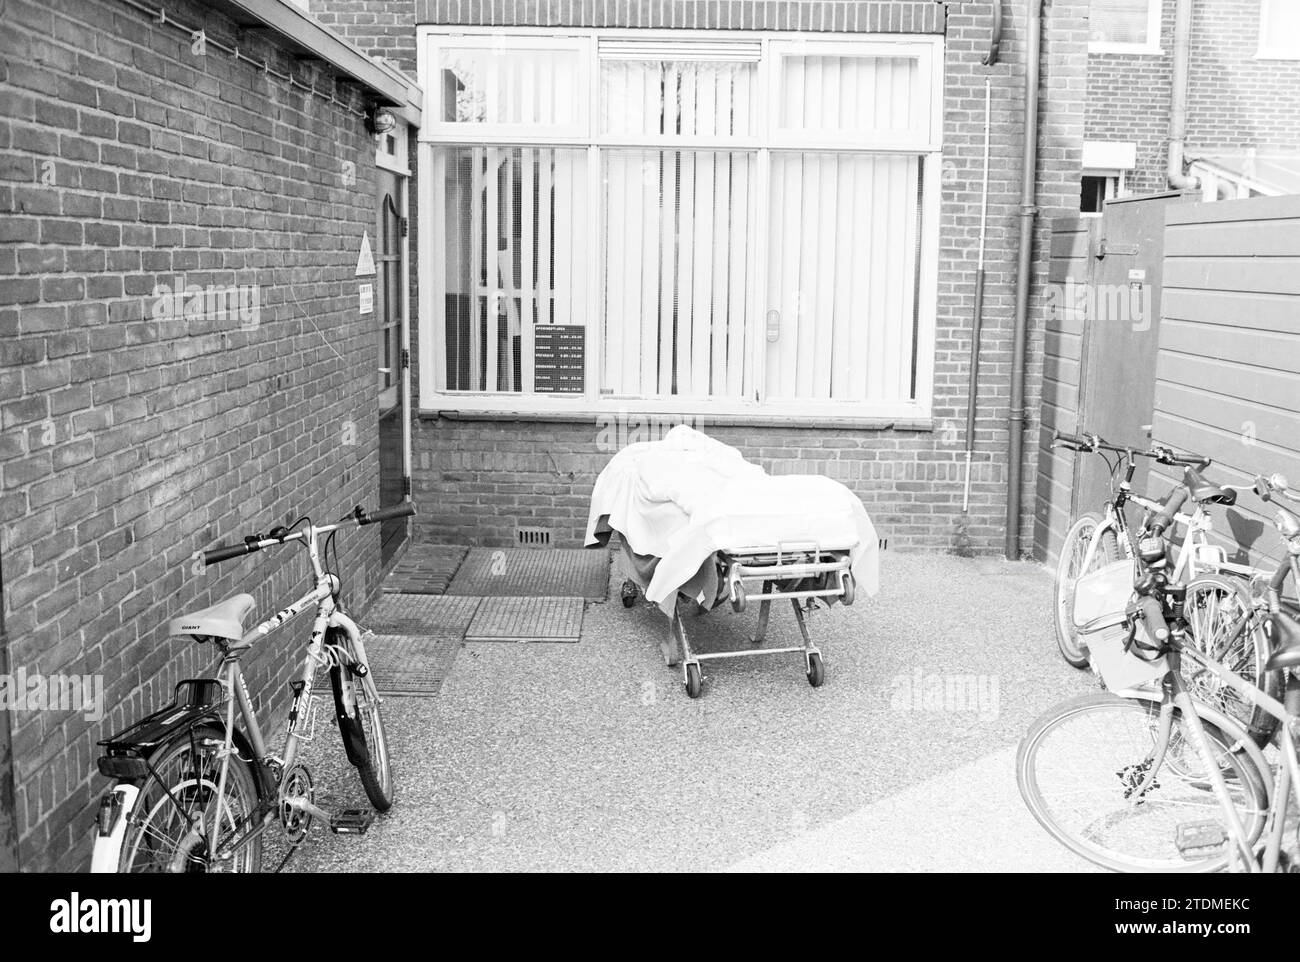 Stretcher at a medical practice?, 00-02-1992, Whizgle News from the Past, Tailored for the Future. Explore historical narratives, Dutch The Netherlands agency image with a modern perspective, bridging the gap between yesterday's events and tomorrow's insights. A timeless journey shaping the stories that shape our future Stock Photo